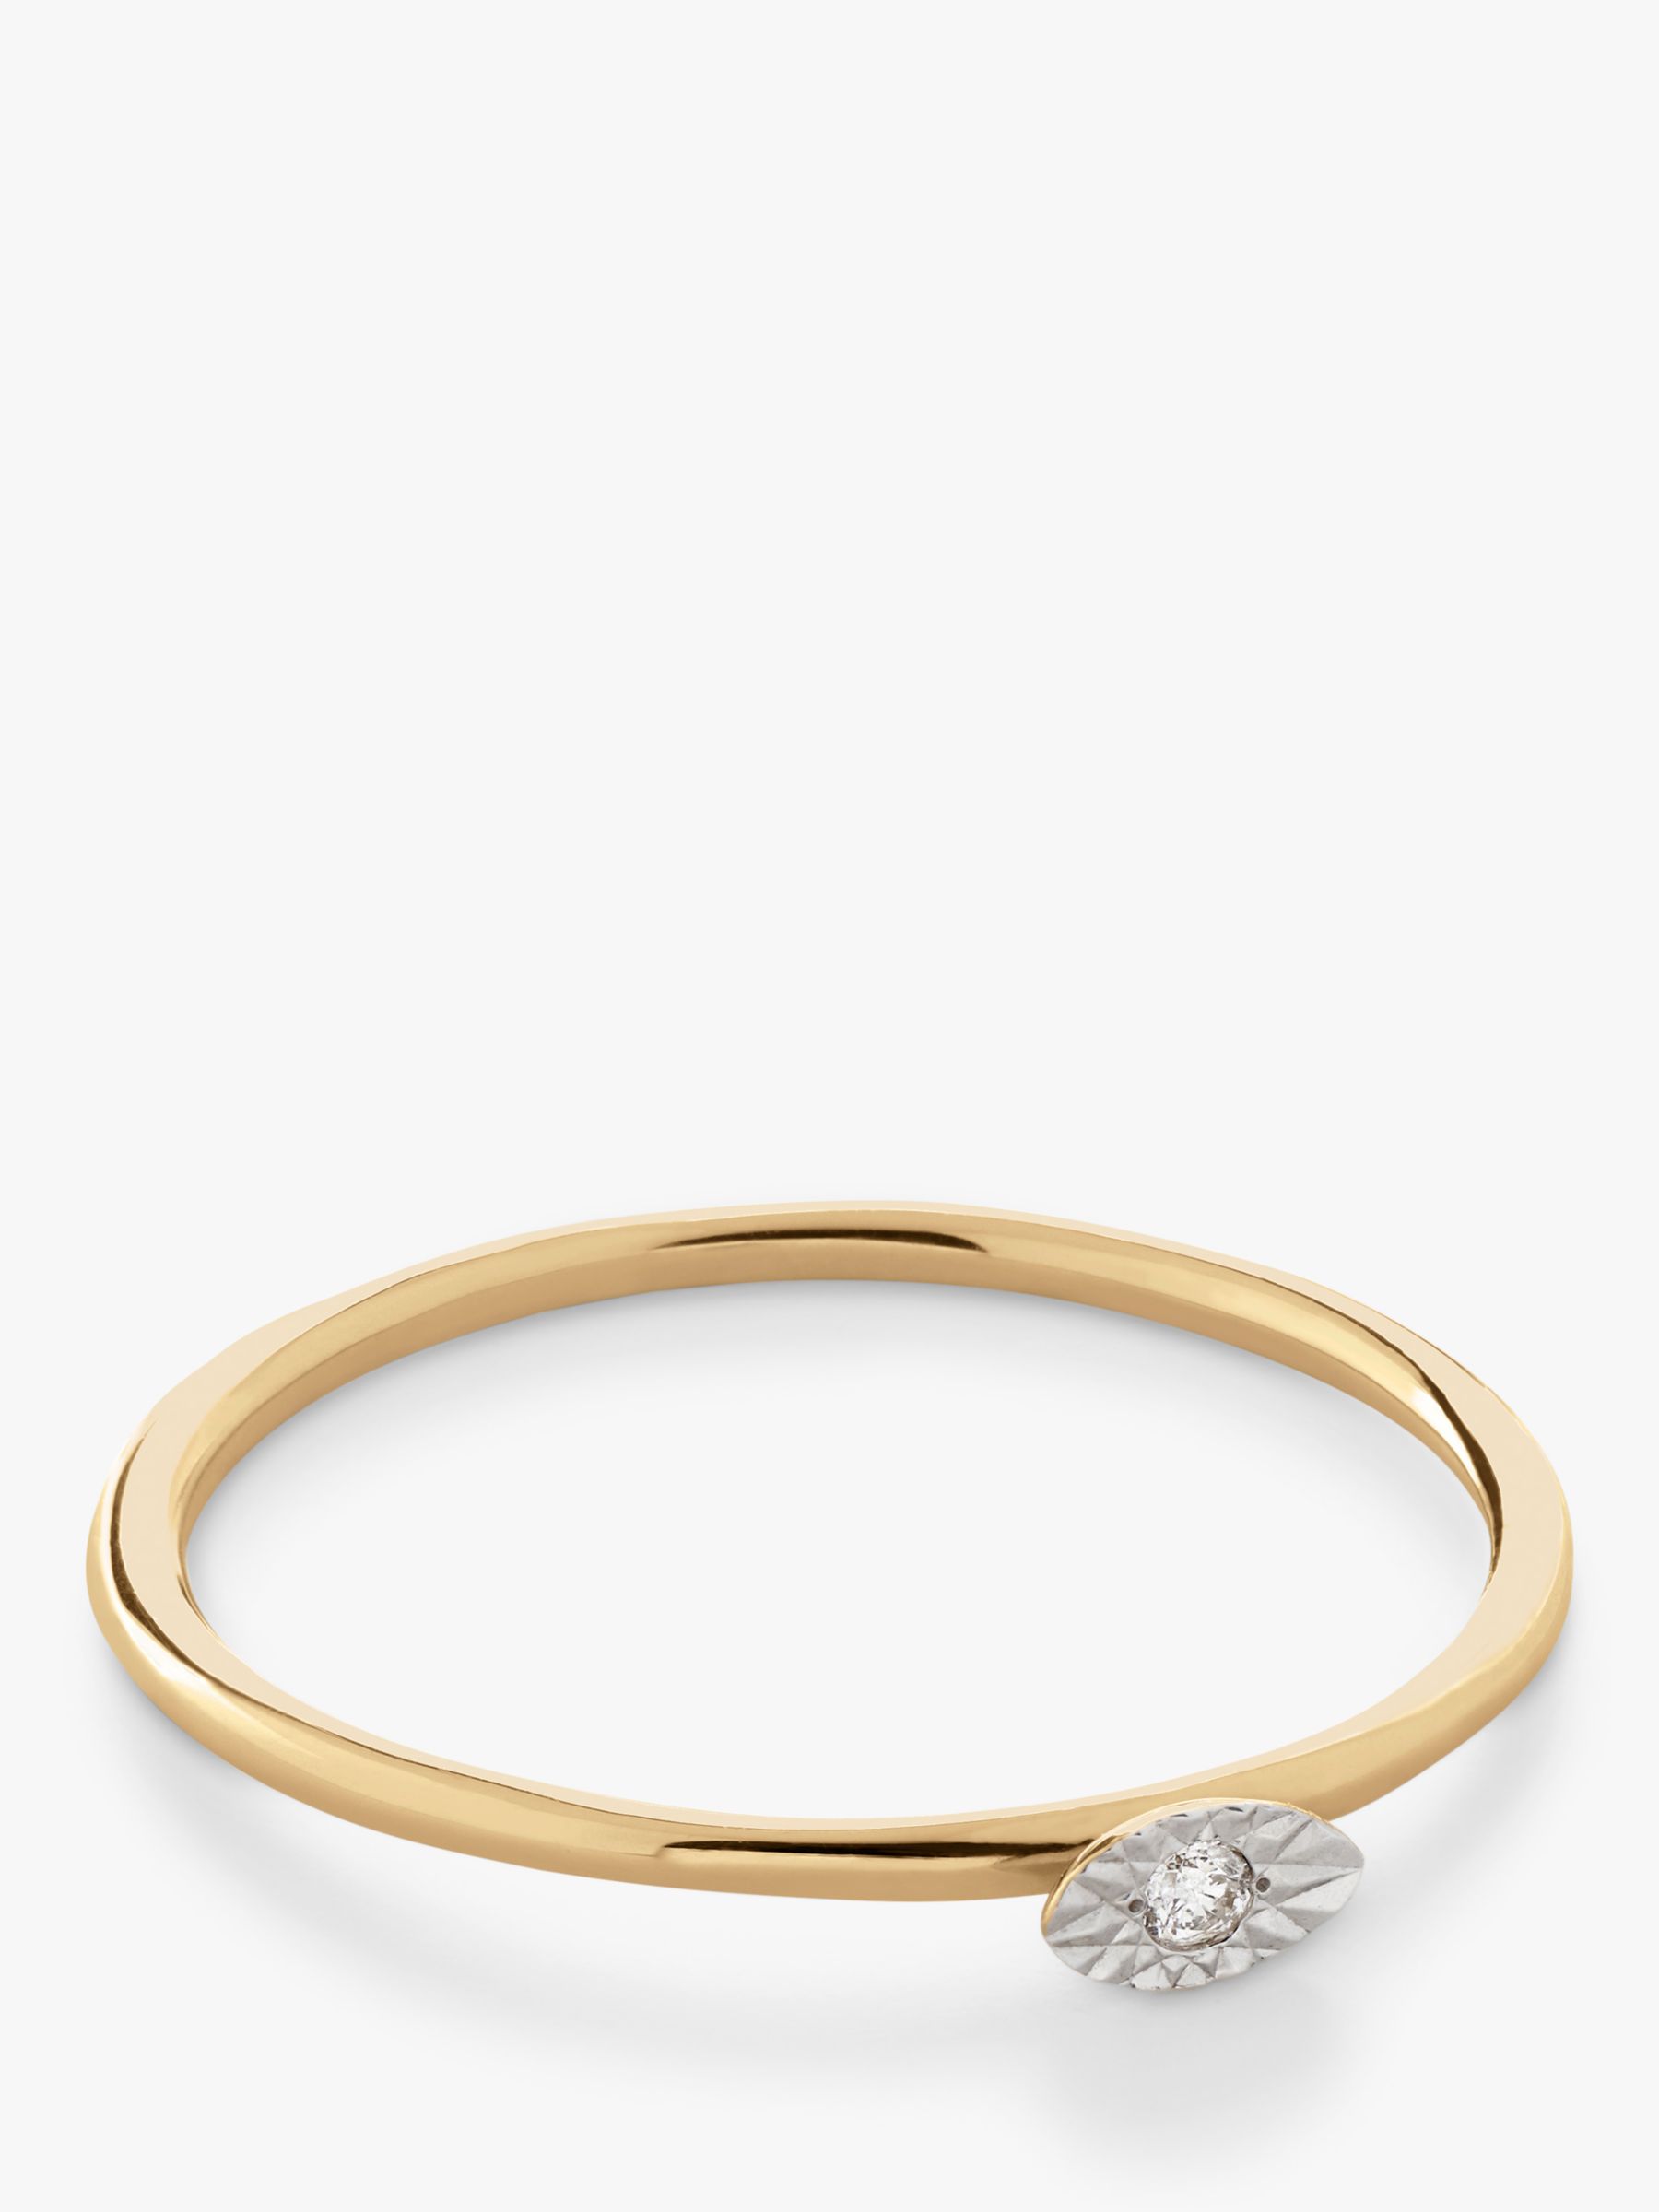 Monica Vinader Marquise 14ct Yellow Gold Diamond Stacking Ring, Gold, K